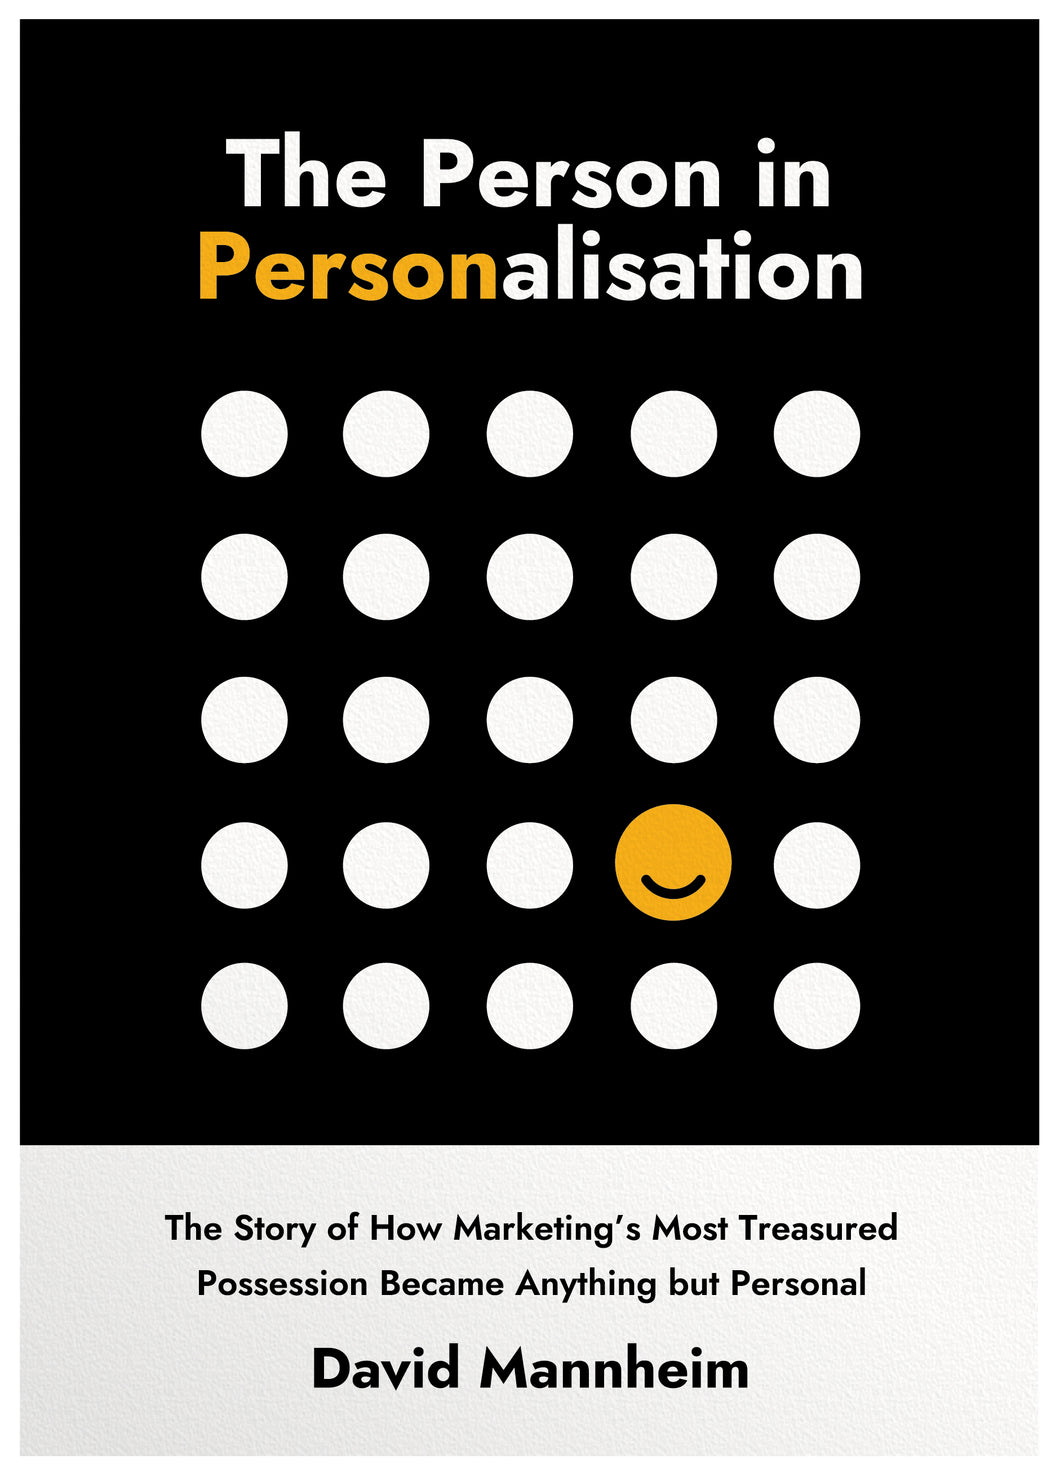 The Person in Personalisation - David Mannheim